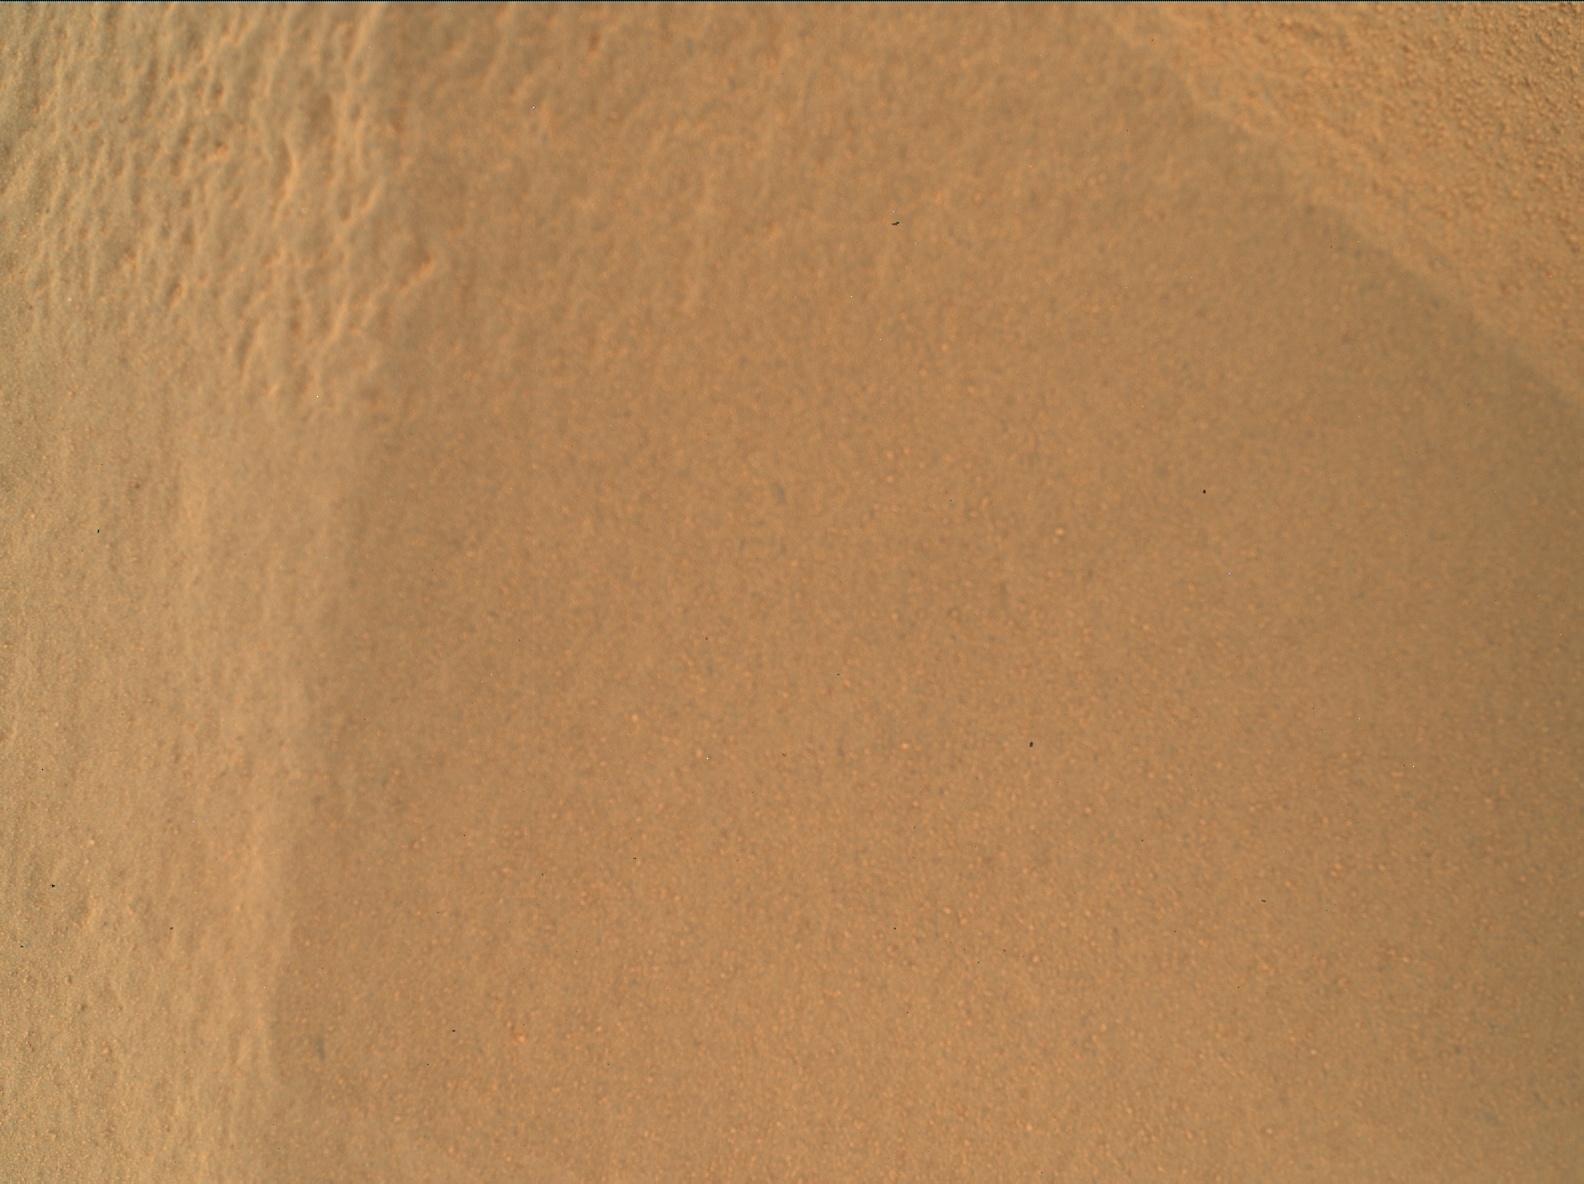 Nasa's Mars rover Curiosity acquired this image using its Mars Hand Lens Imager (MAHLI) on Sol 54